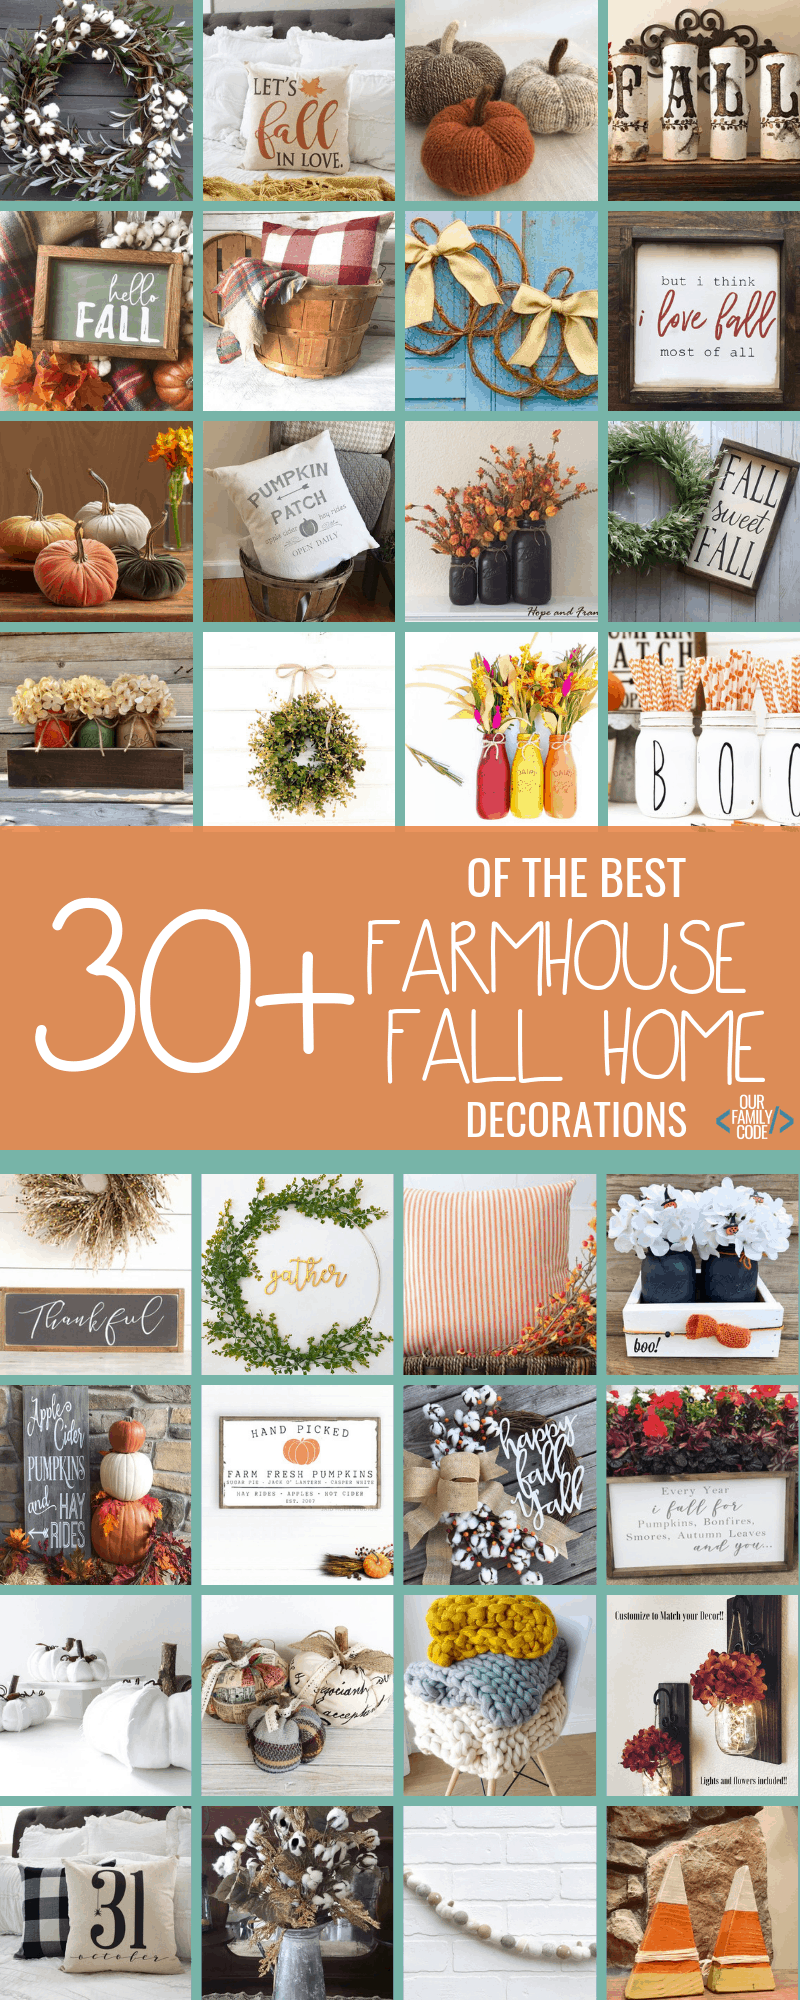 I'm a huge fan of the Autumn season & there are so many cute indoor decorations available!! Check out my top picks for farmhouse fall home decorations! #fallhomedecor #indoordecorforfall #handmadefalldecorations #farmhousefalldecor #pumpkindecorations #fallwreaths #farmhousefallsigns #fallpillows #autumndecor